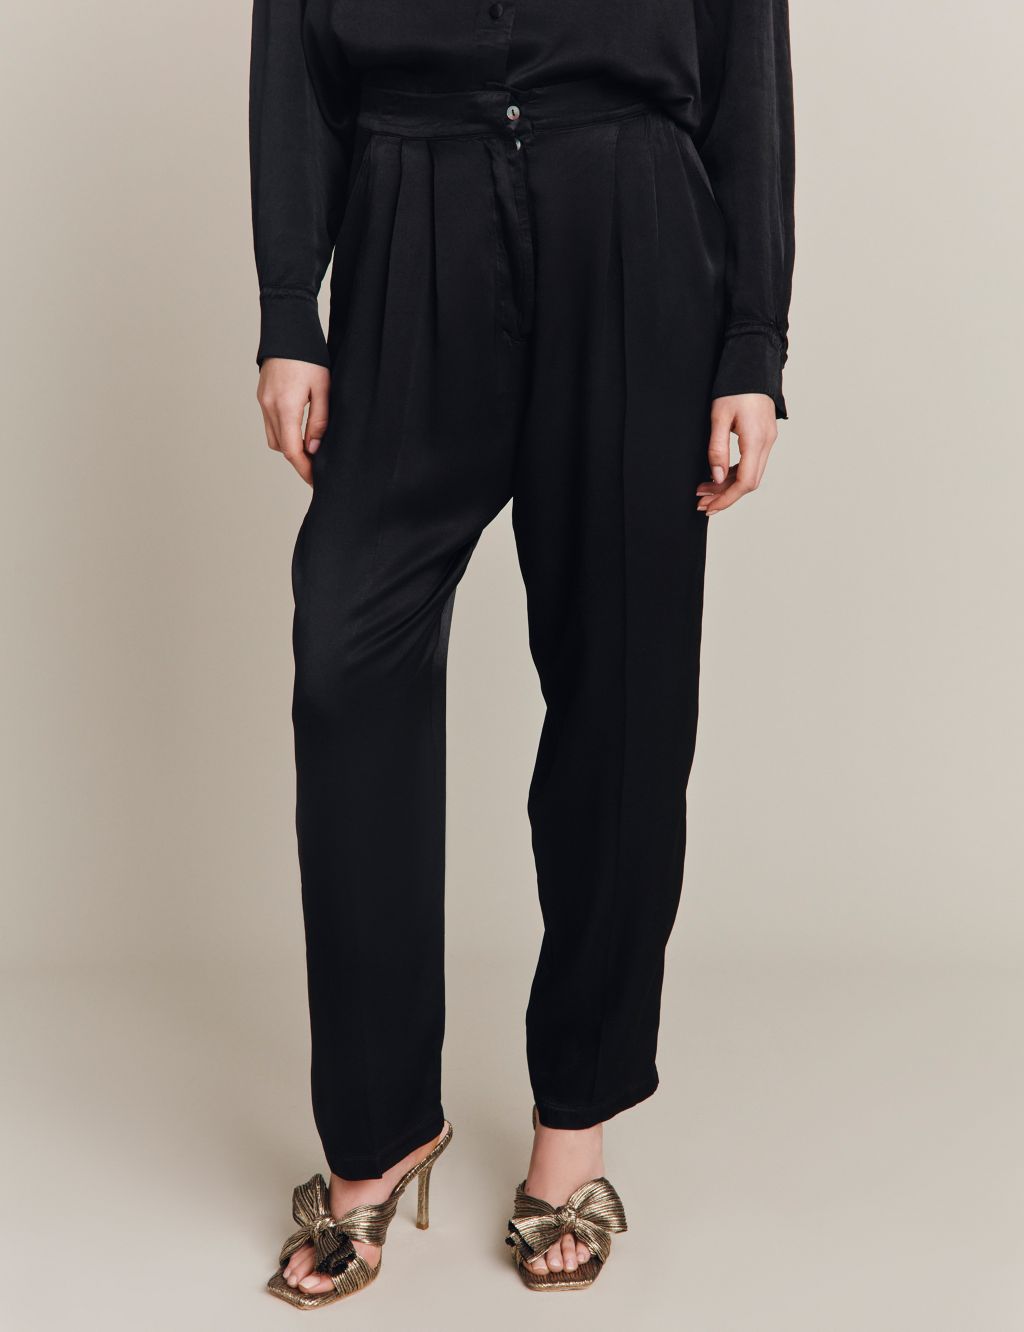 Satin Pleat Front Tapered Trousers image 2